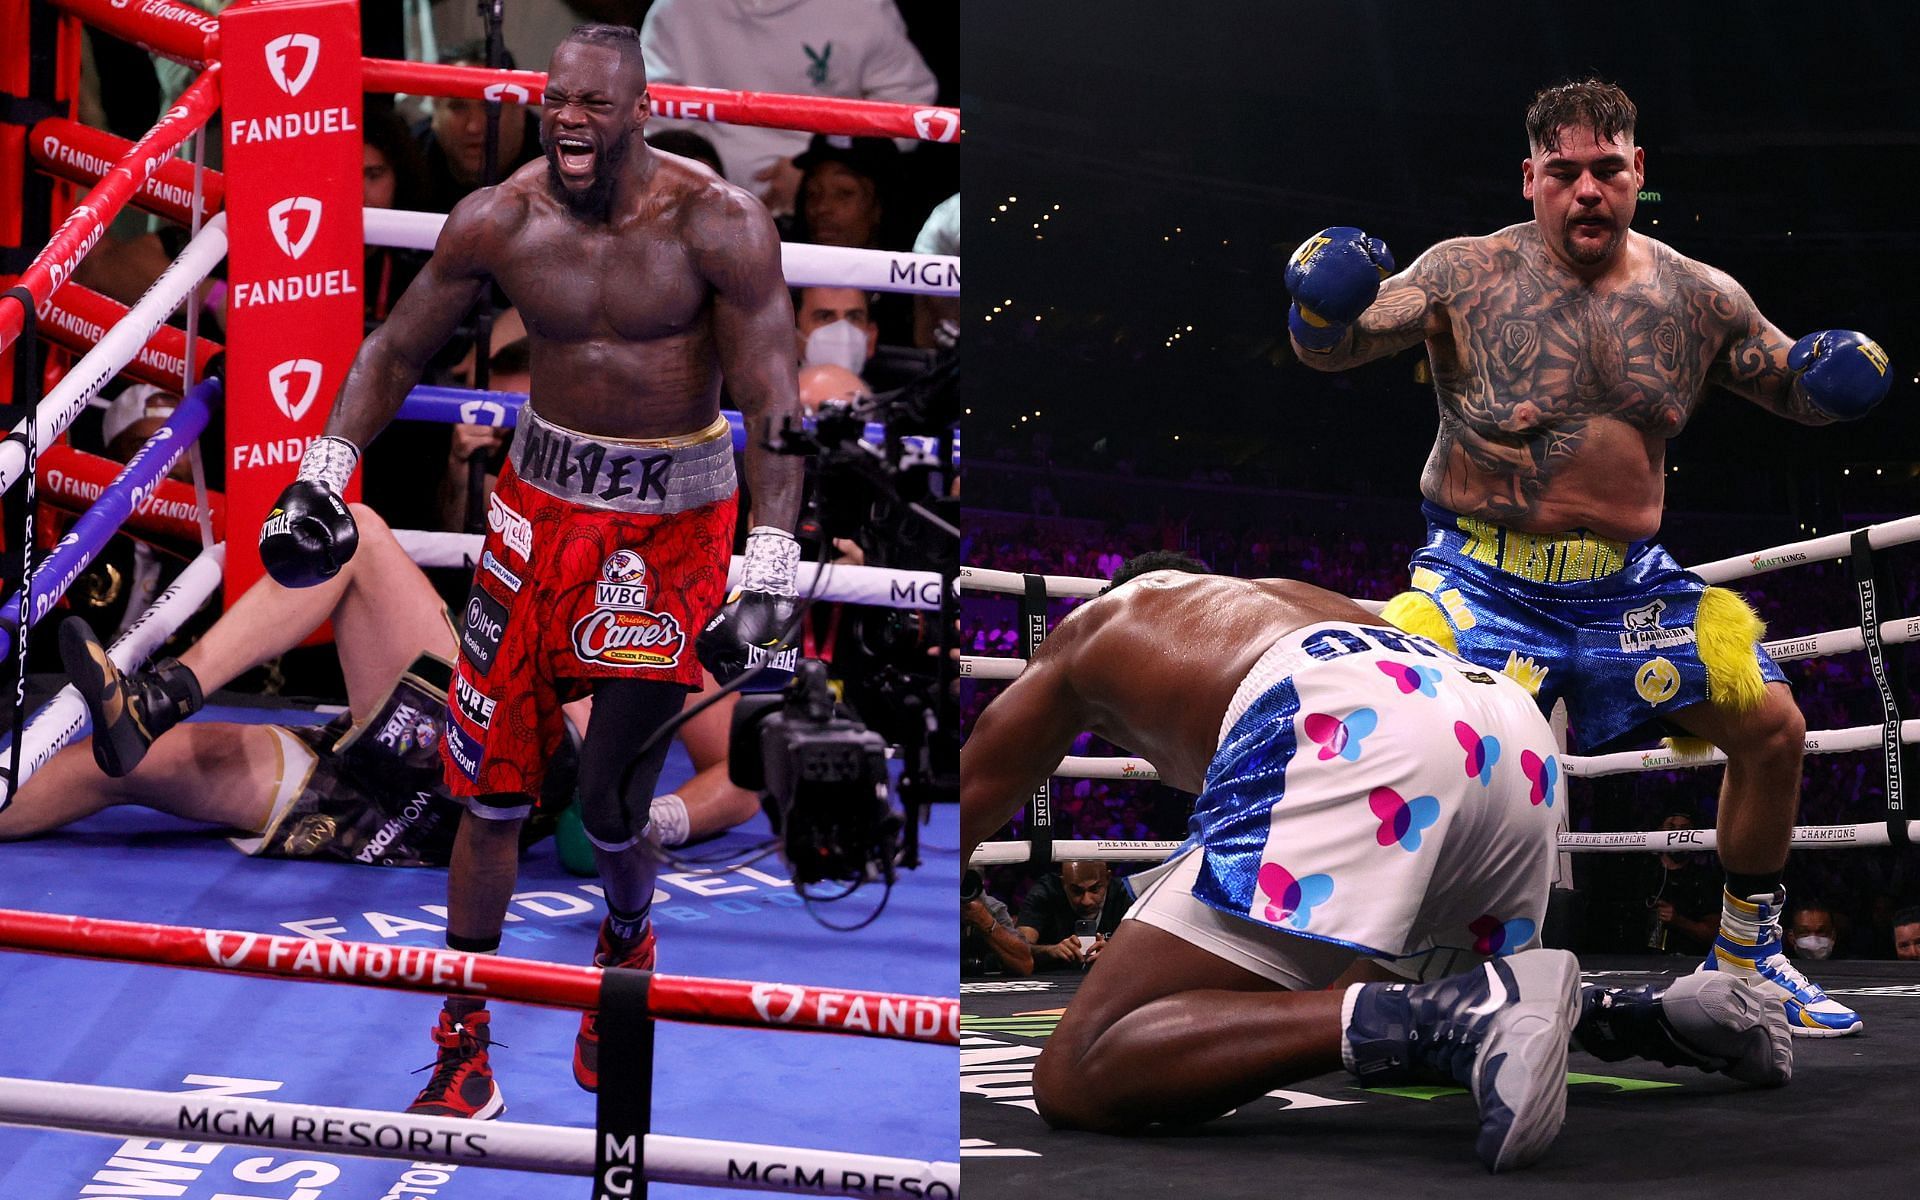 Deontay Wilder (left) and Andy Ruiz Jr. knocking down Luis Ortiz (right) (Image credits Getty Images)